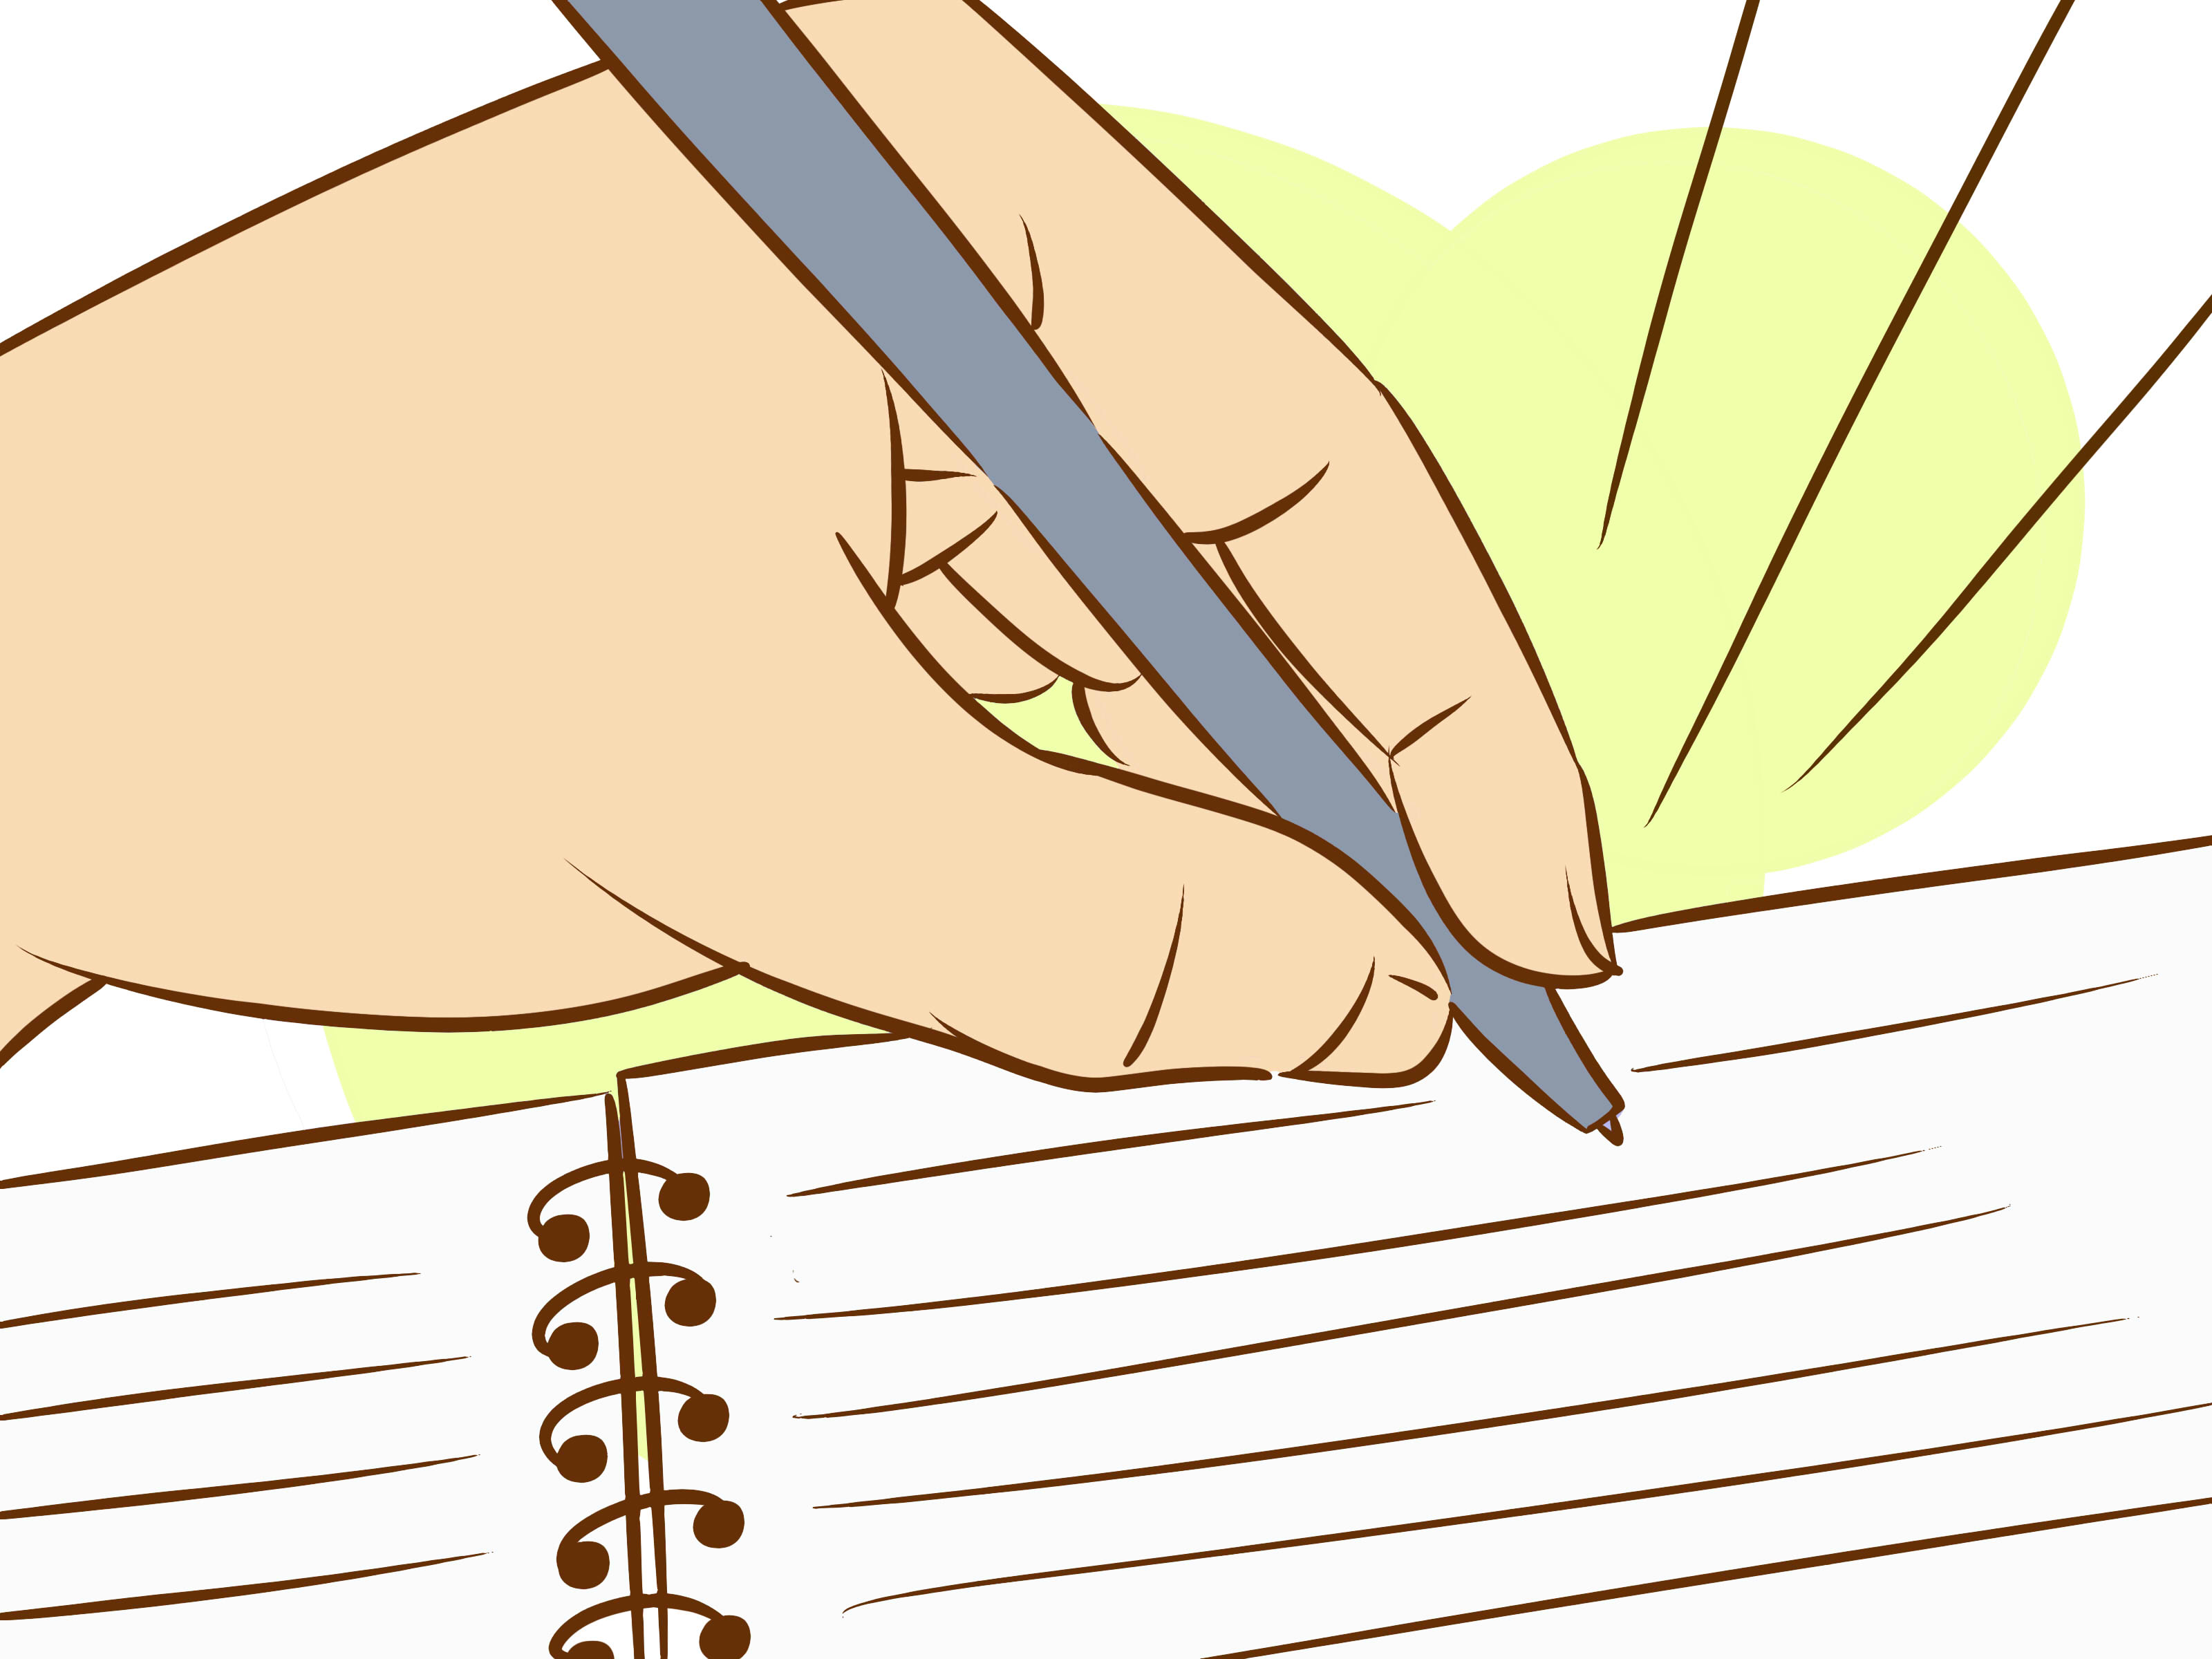 5 Simple Ways to Write a Book - wikiHow